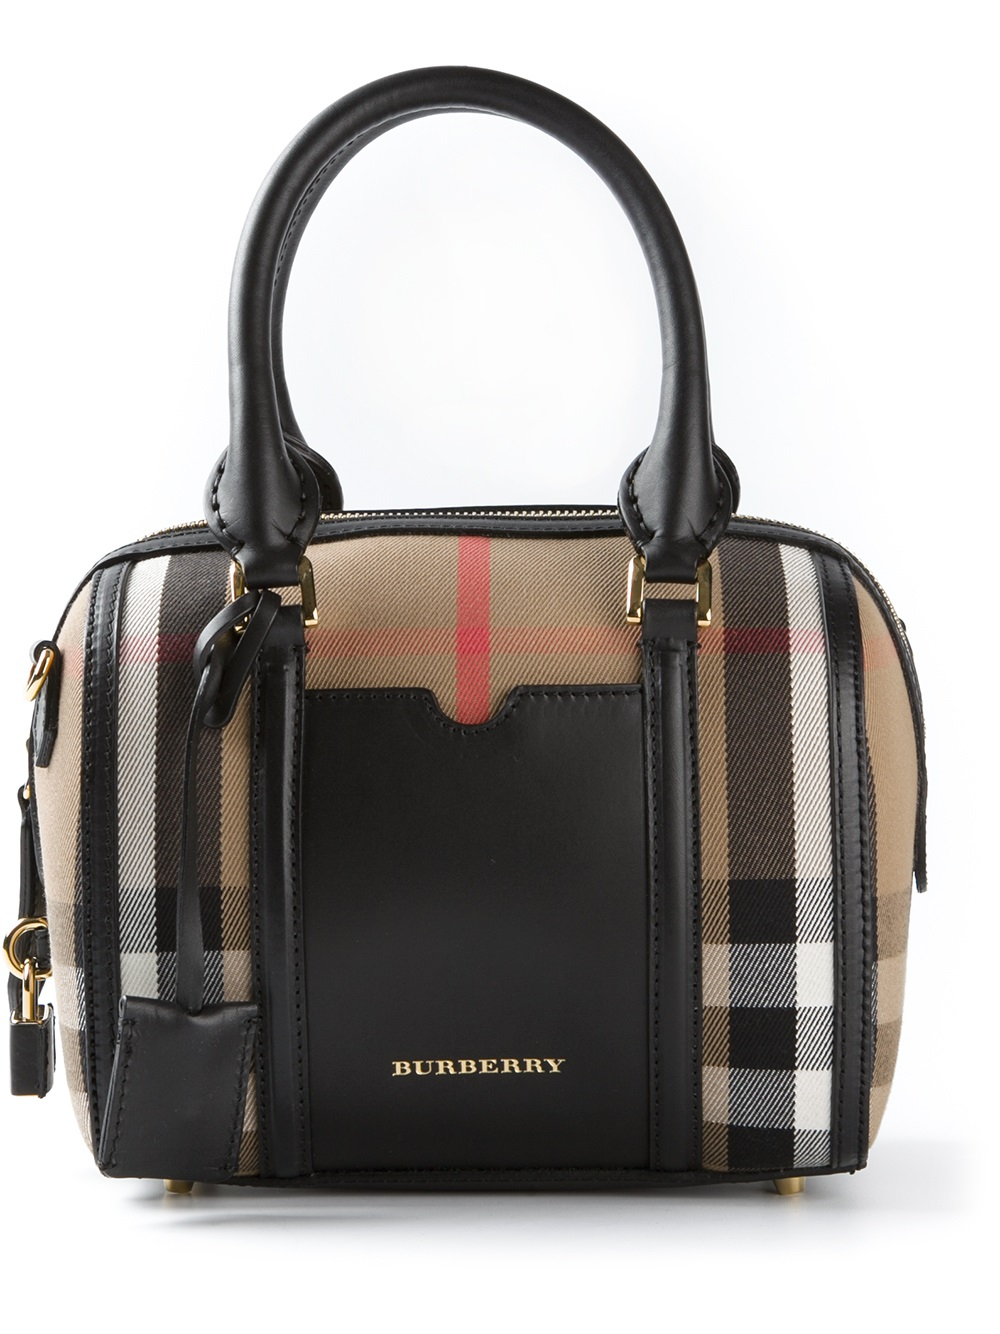 Burberry Small Alchester Bowling Bag in Brown - Lyst